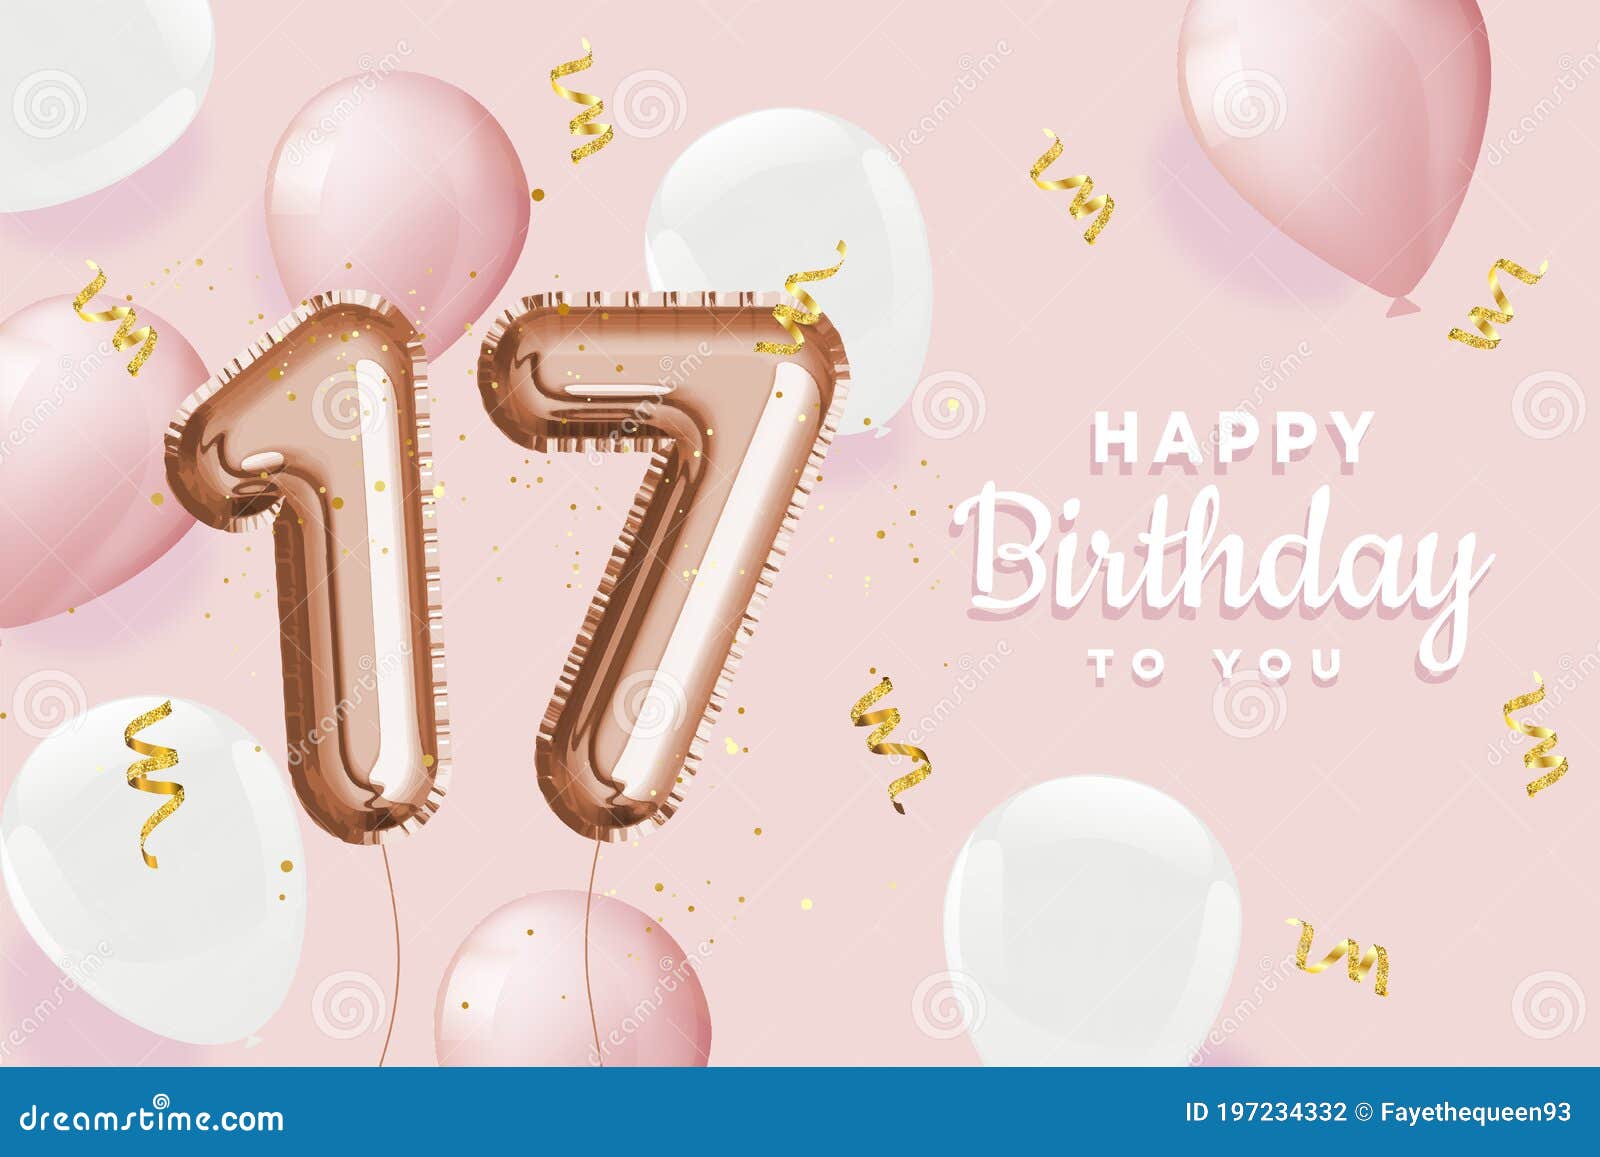 Happy 17th Birthday Pink Foil Balloon Greeting Background Stock Vector